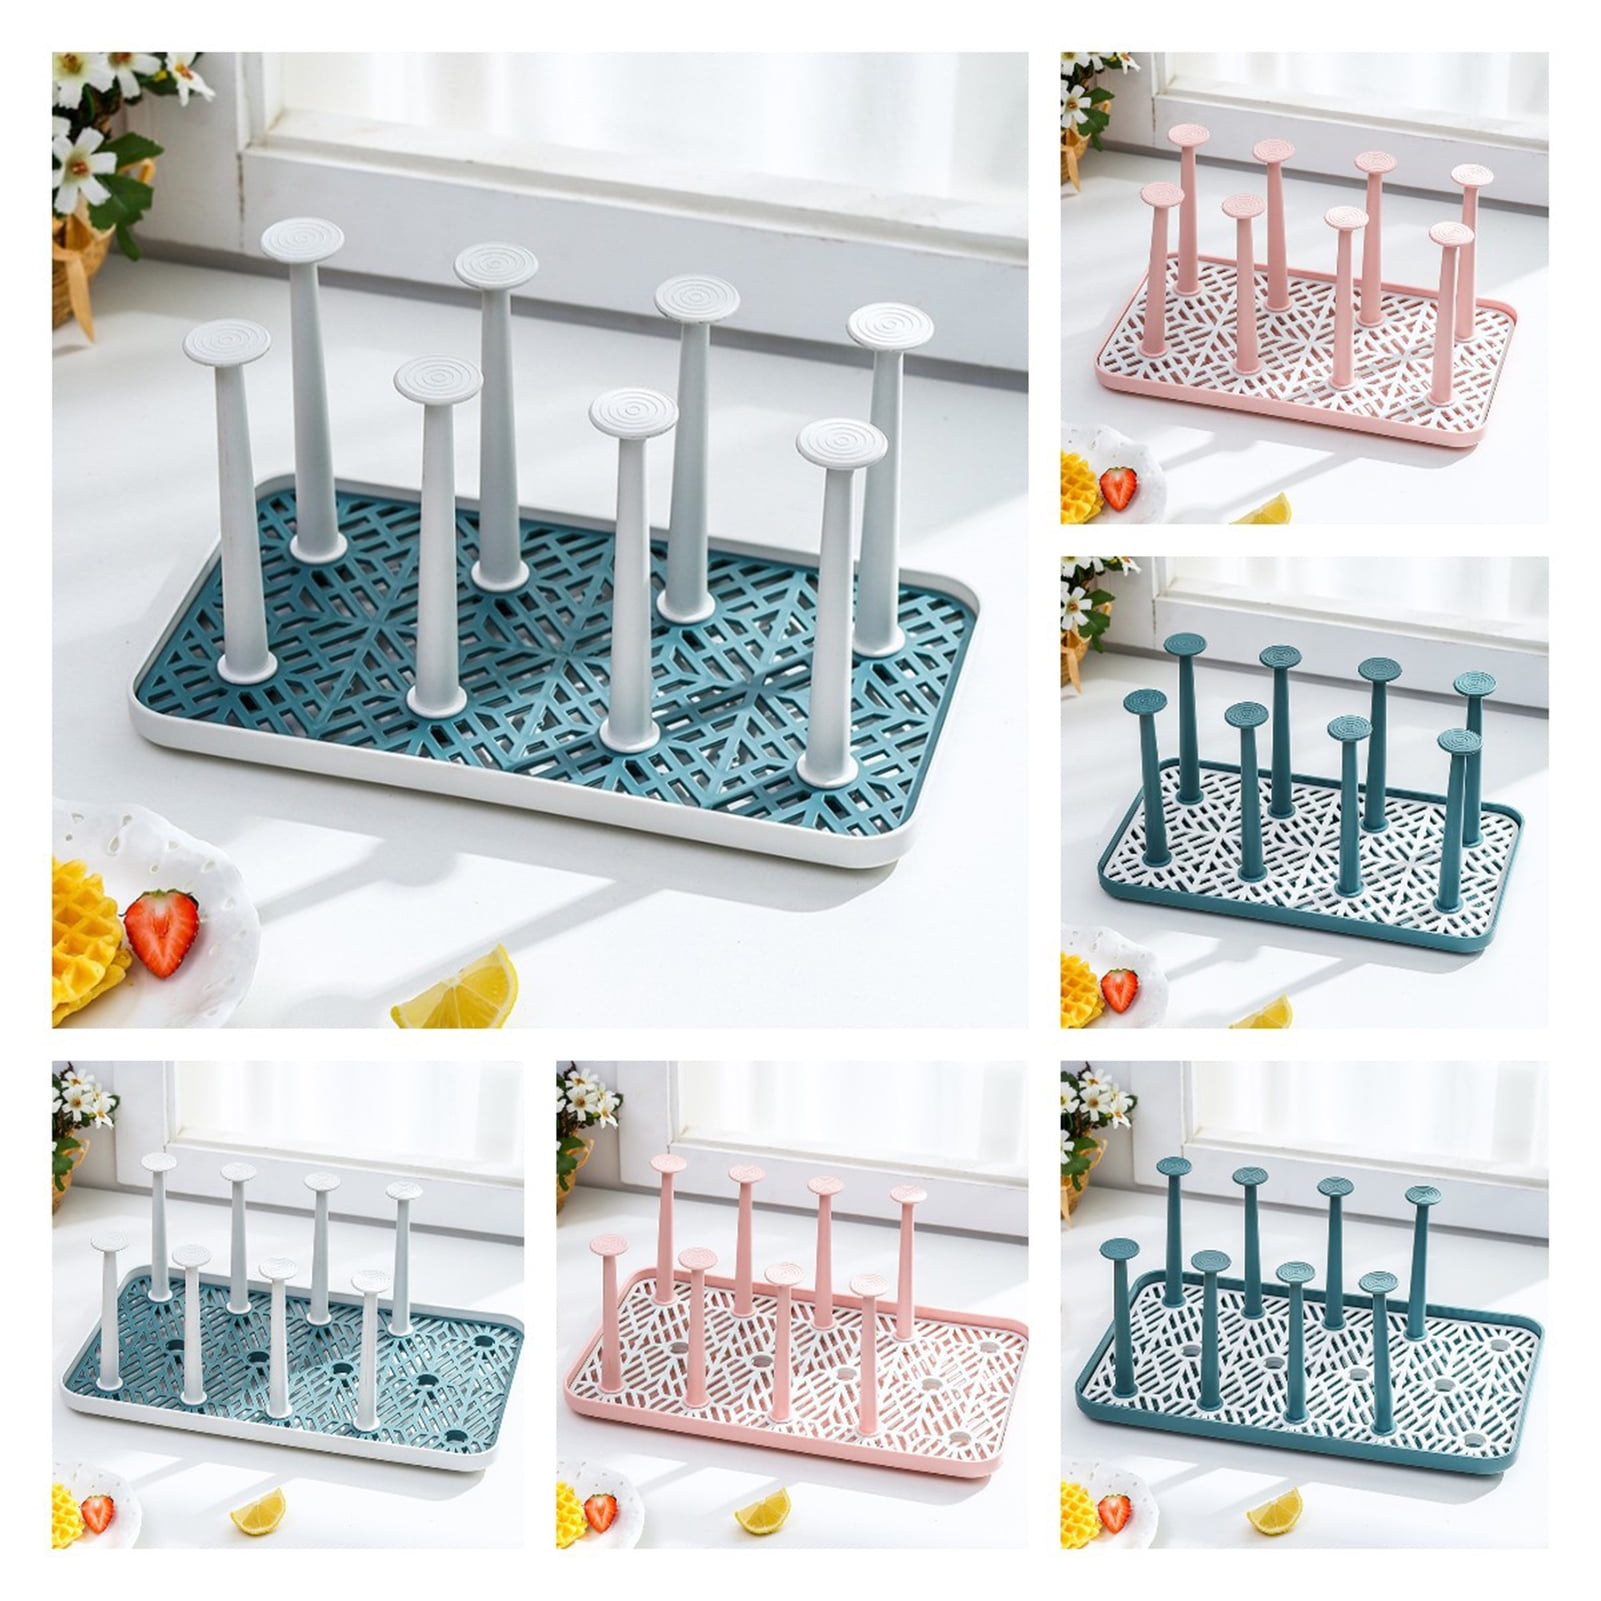 1x 6 Glass Cups Stand Holder Drying Shelf Kitchen Water Cup Rack